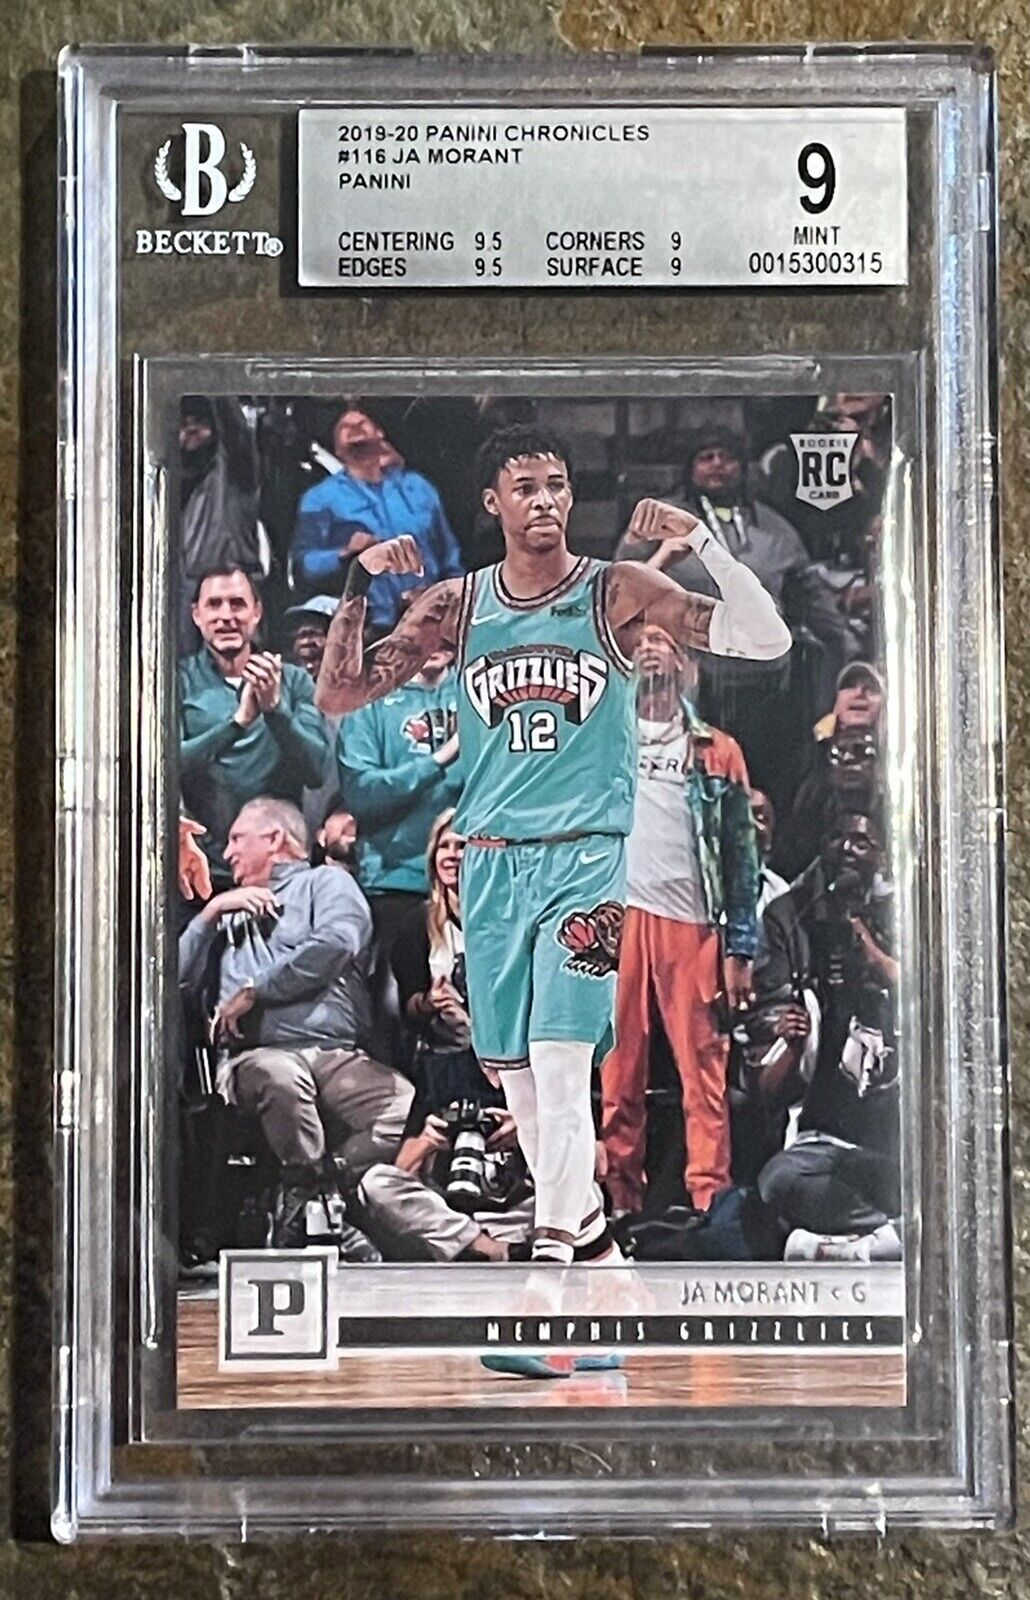 2019-20 PANINI CHRONICLES #116 JA MORANT W/YOUNG DOLPH ROOKIE CARD BGS 9 MINT